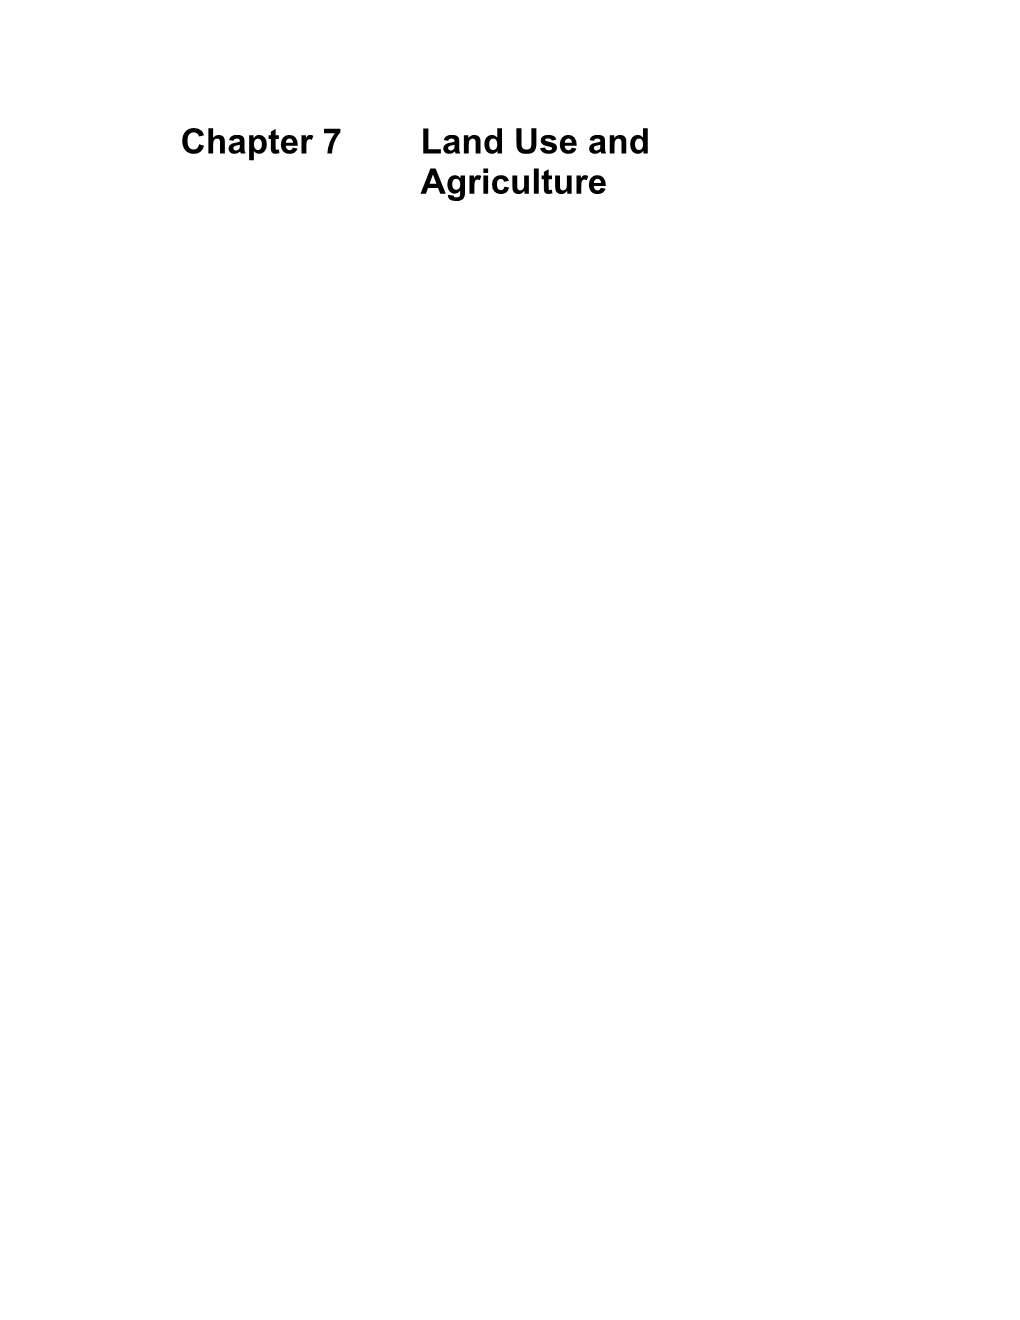 Chapter 7 Land Use and Agriculture